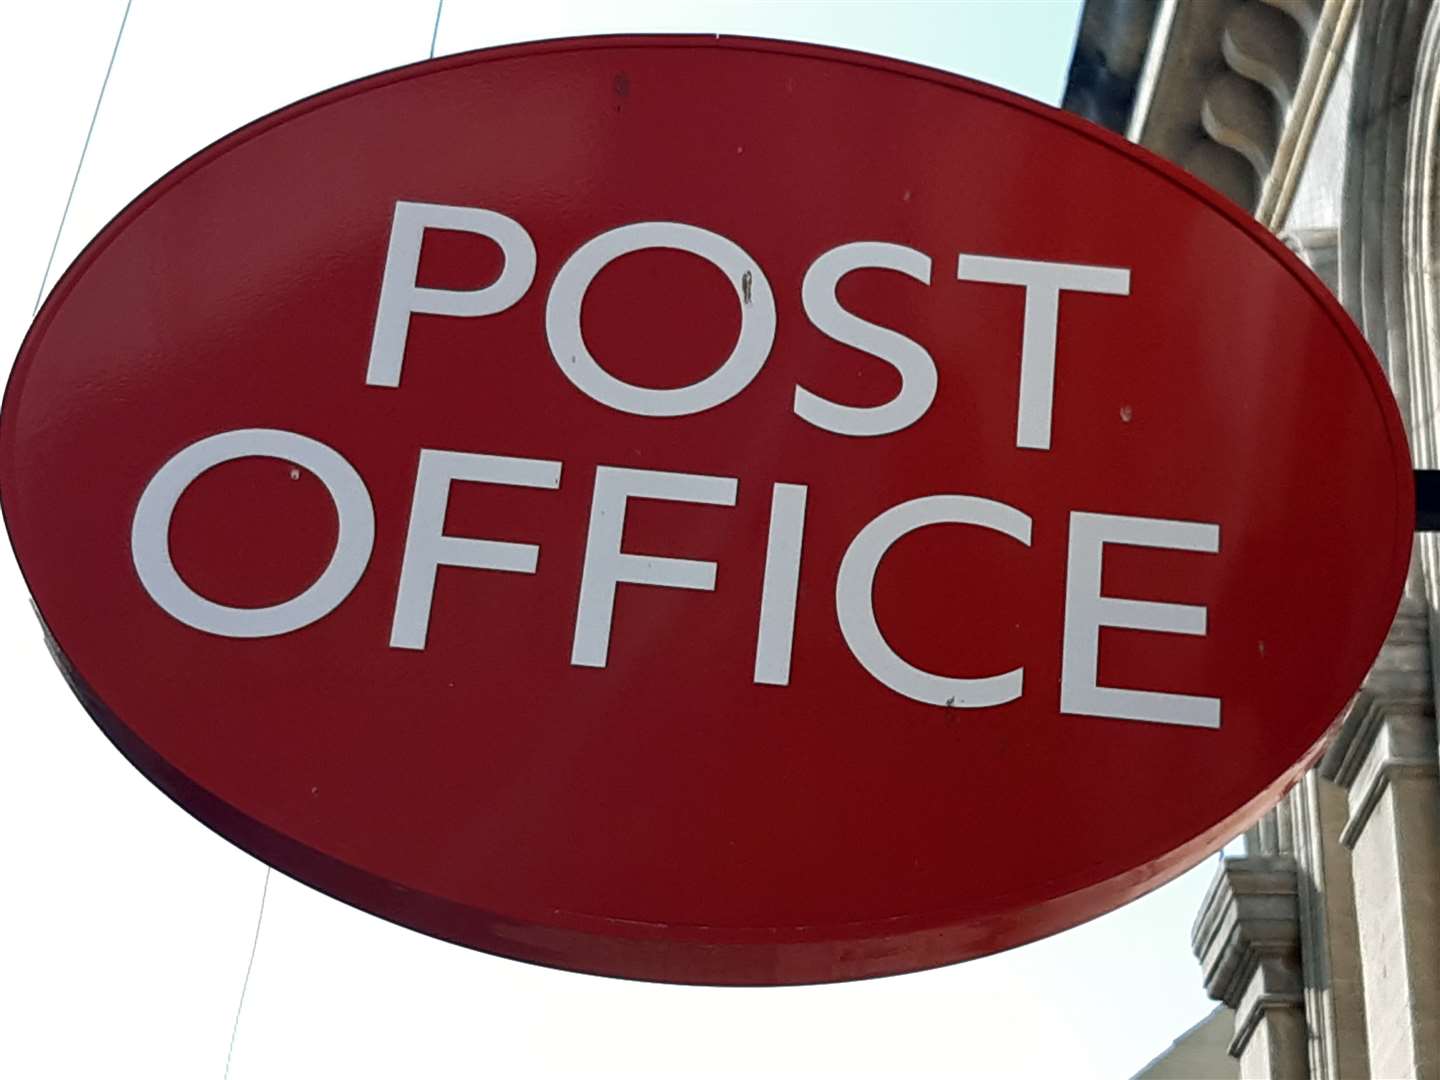 HMRC will no longer pay tax credit and child benefit payments into Post Office card accounts after the end of this month